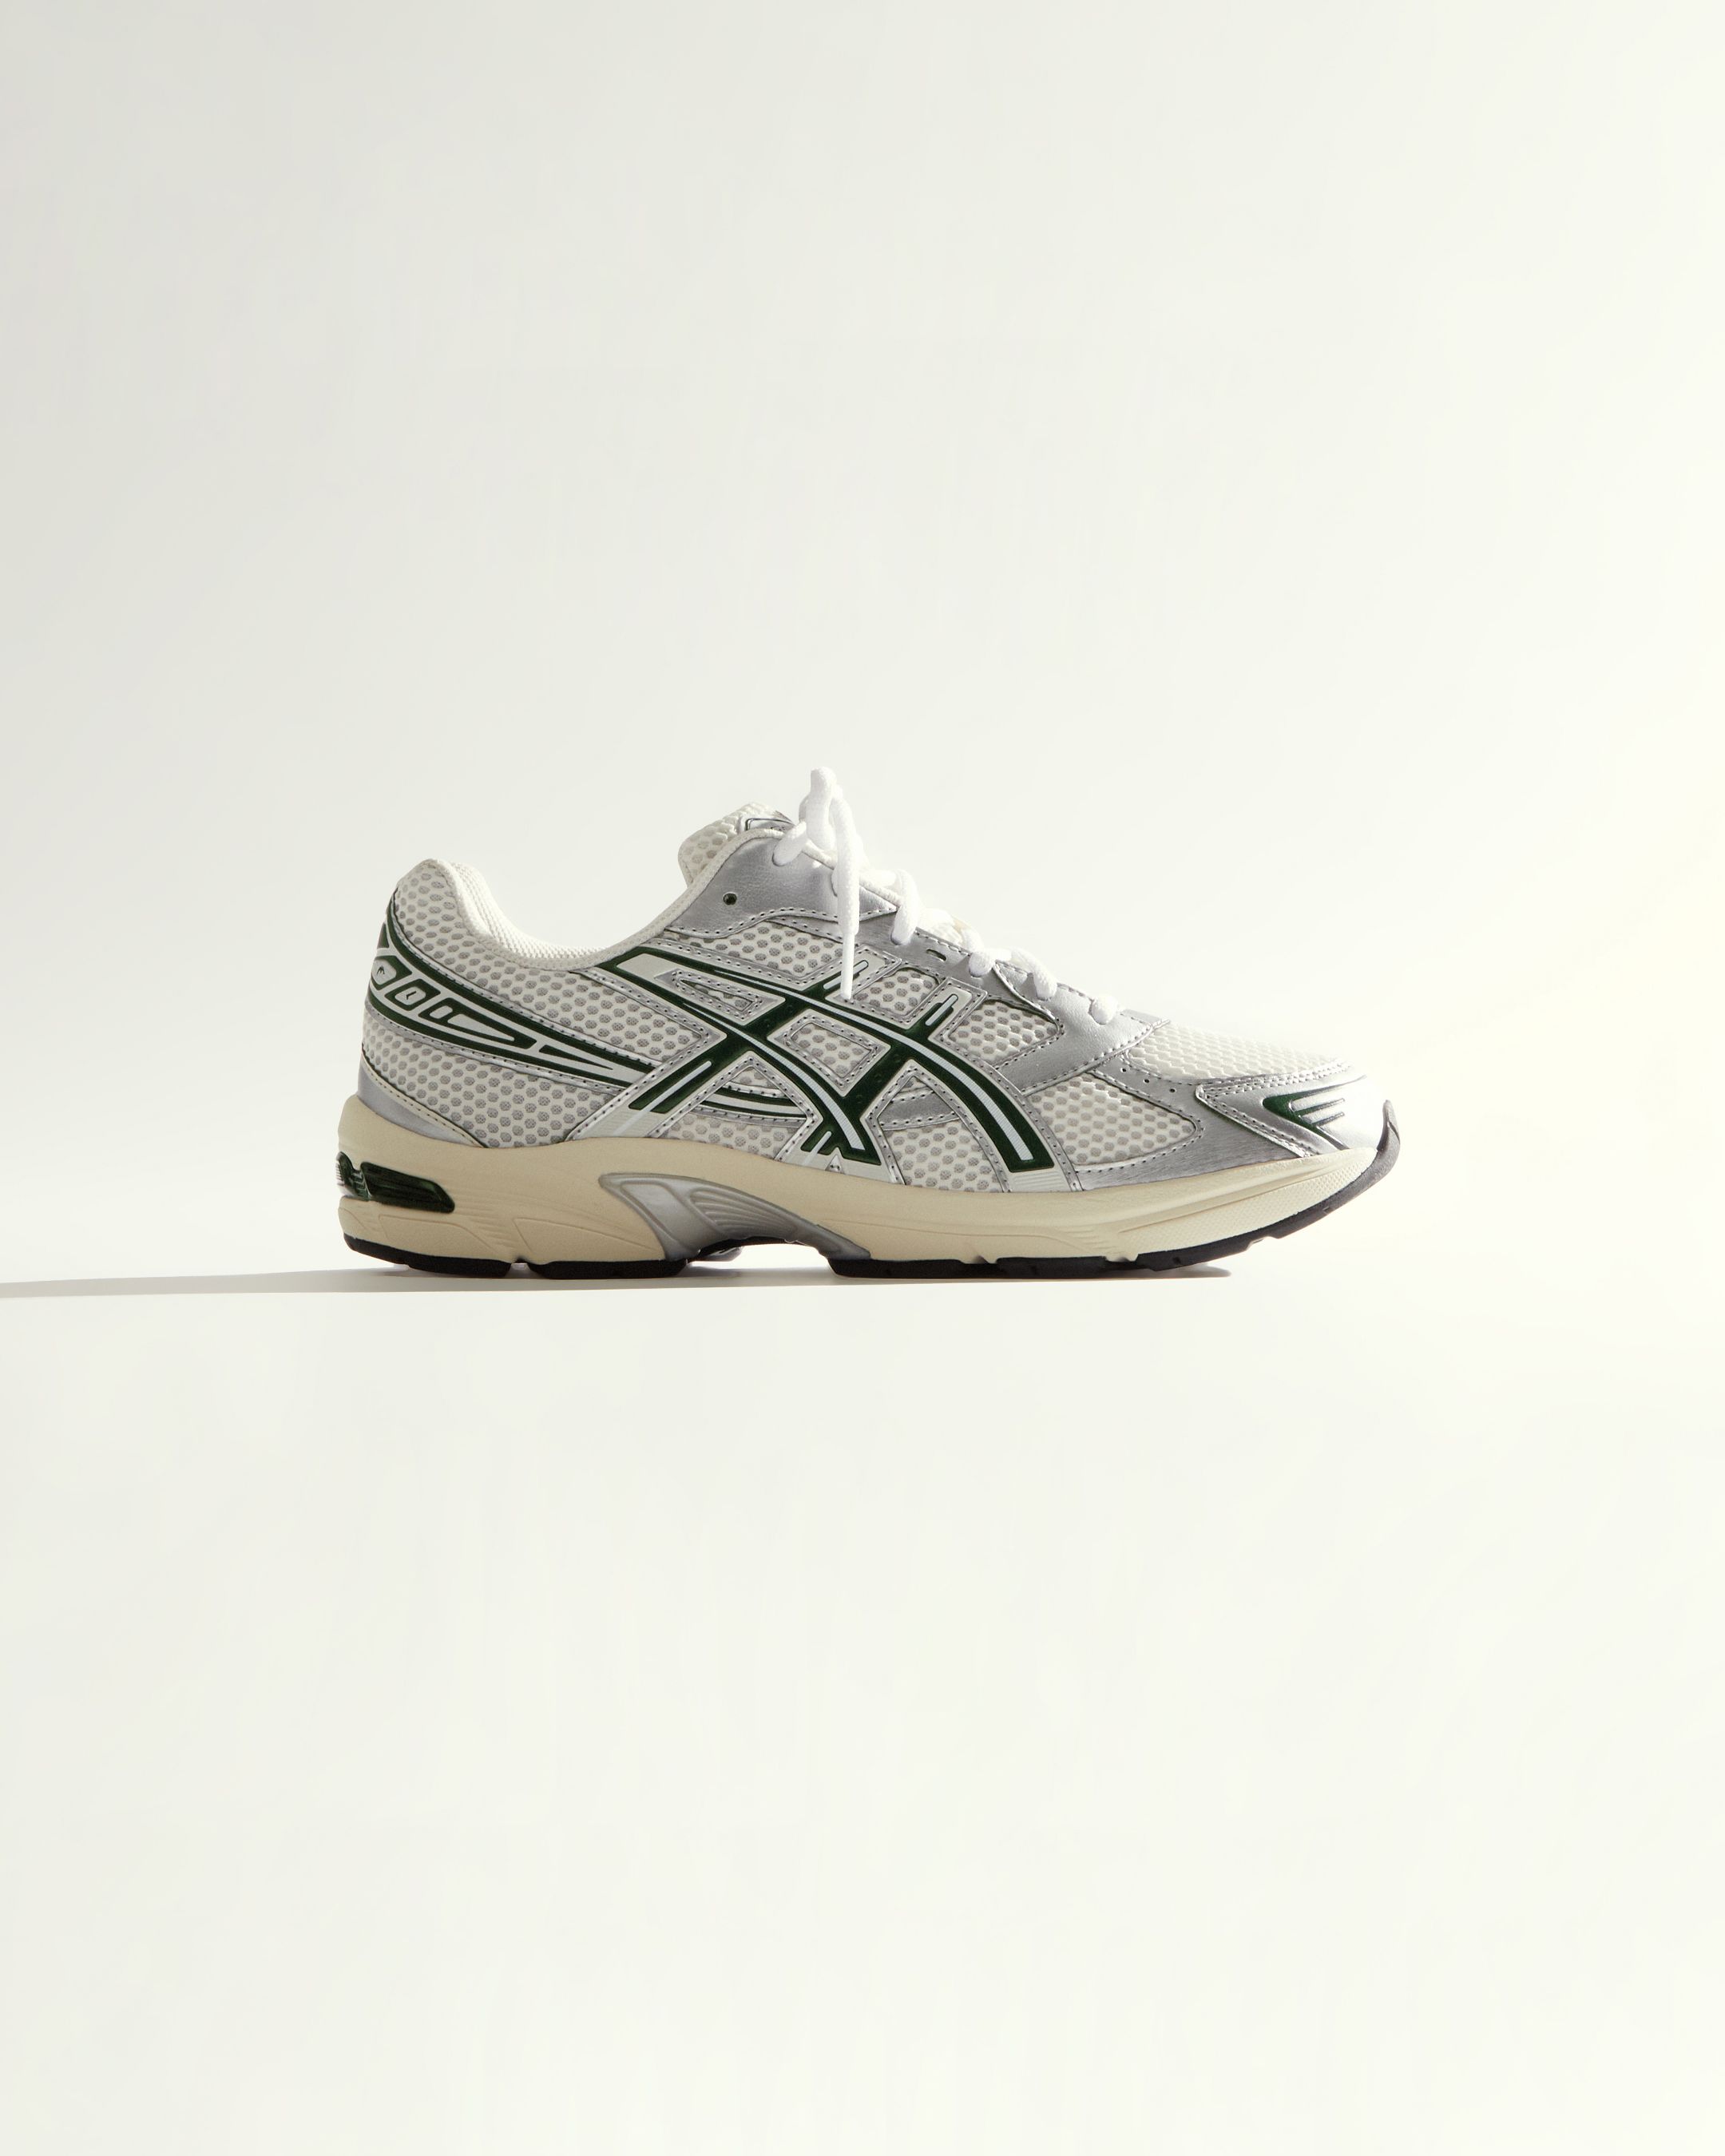 The Kith x Asics Vintage Tech Collection Releases June 23 